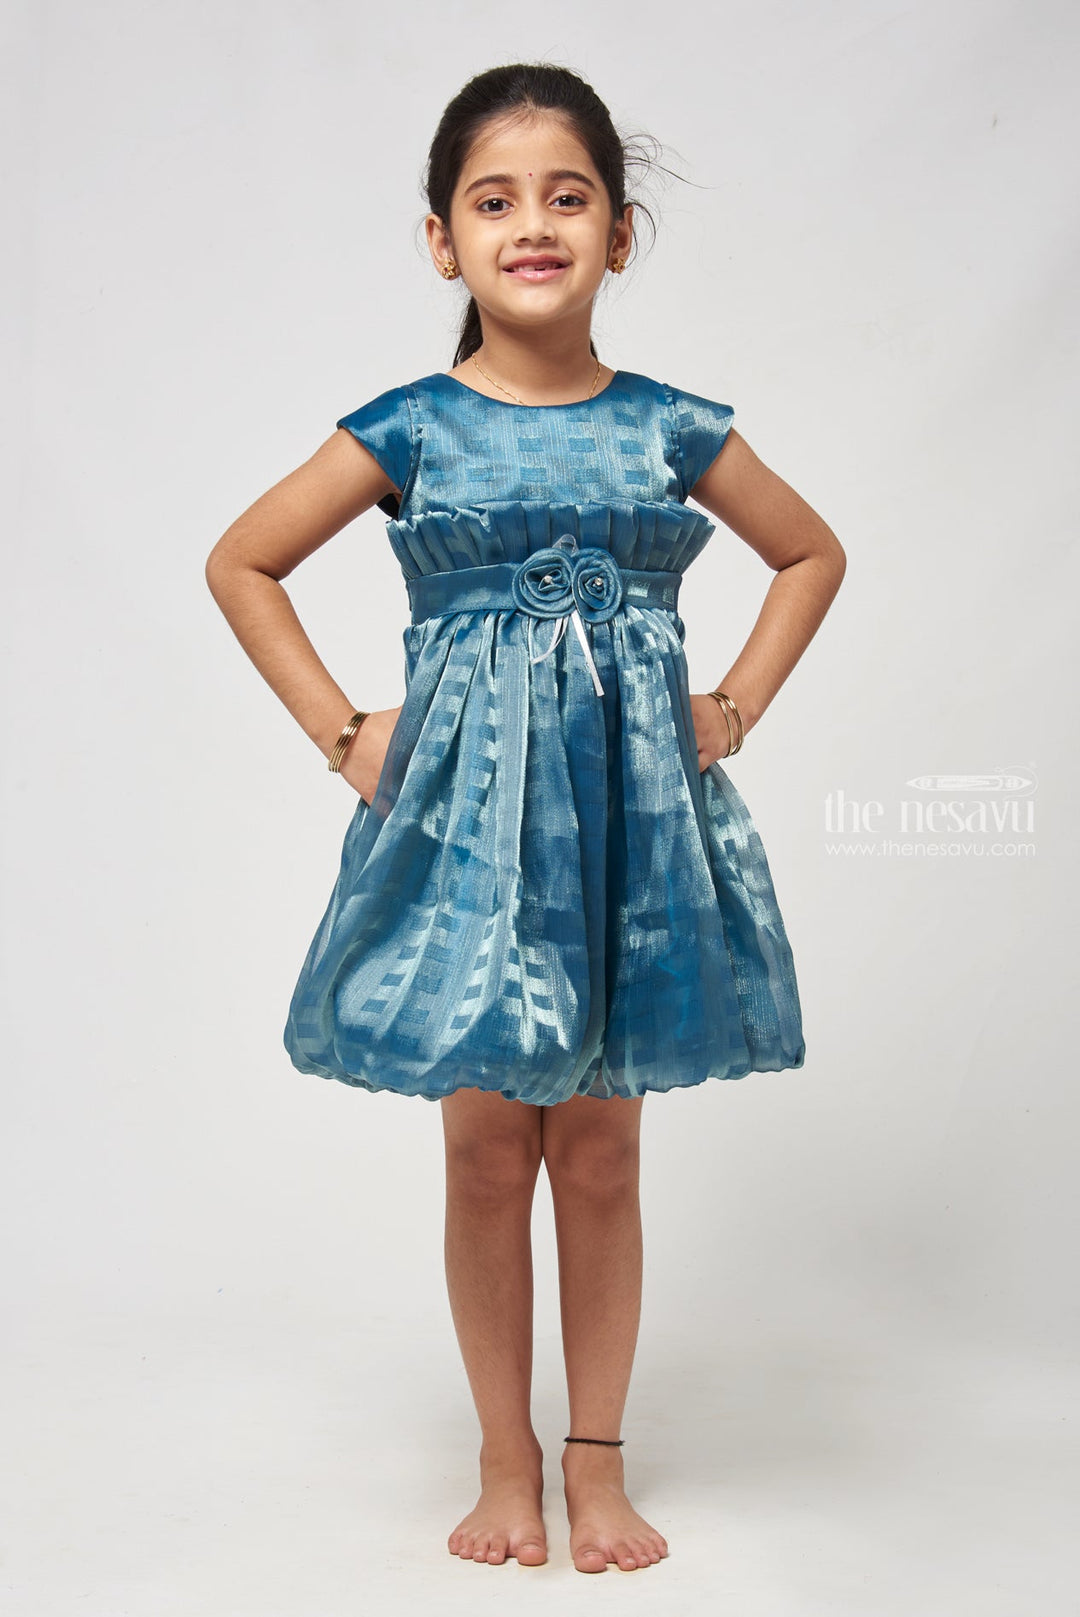 The Nesavu Girls Fancy Frock Kids Designer Tiered Frock with Satin Lining and Floral Appliqué Nesavu 16 (1Y) / Blue / Organza GFC1122A-16 Girls’ Boutique Cocktail Dress - Best For Birthday & Play Dates | The Nesavu